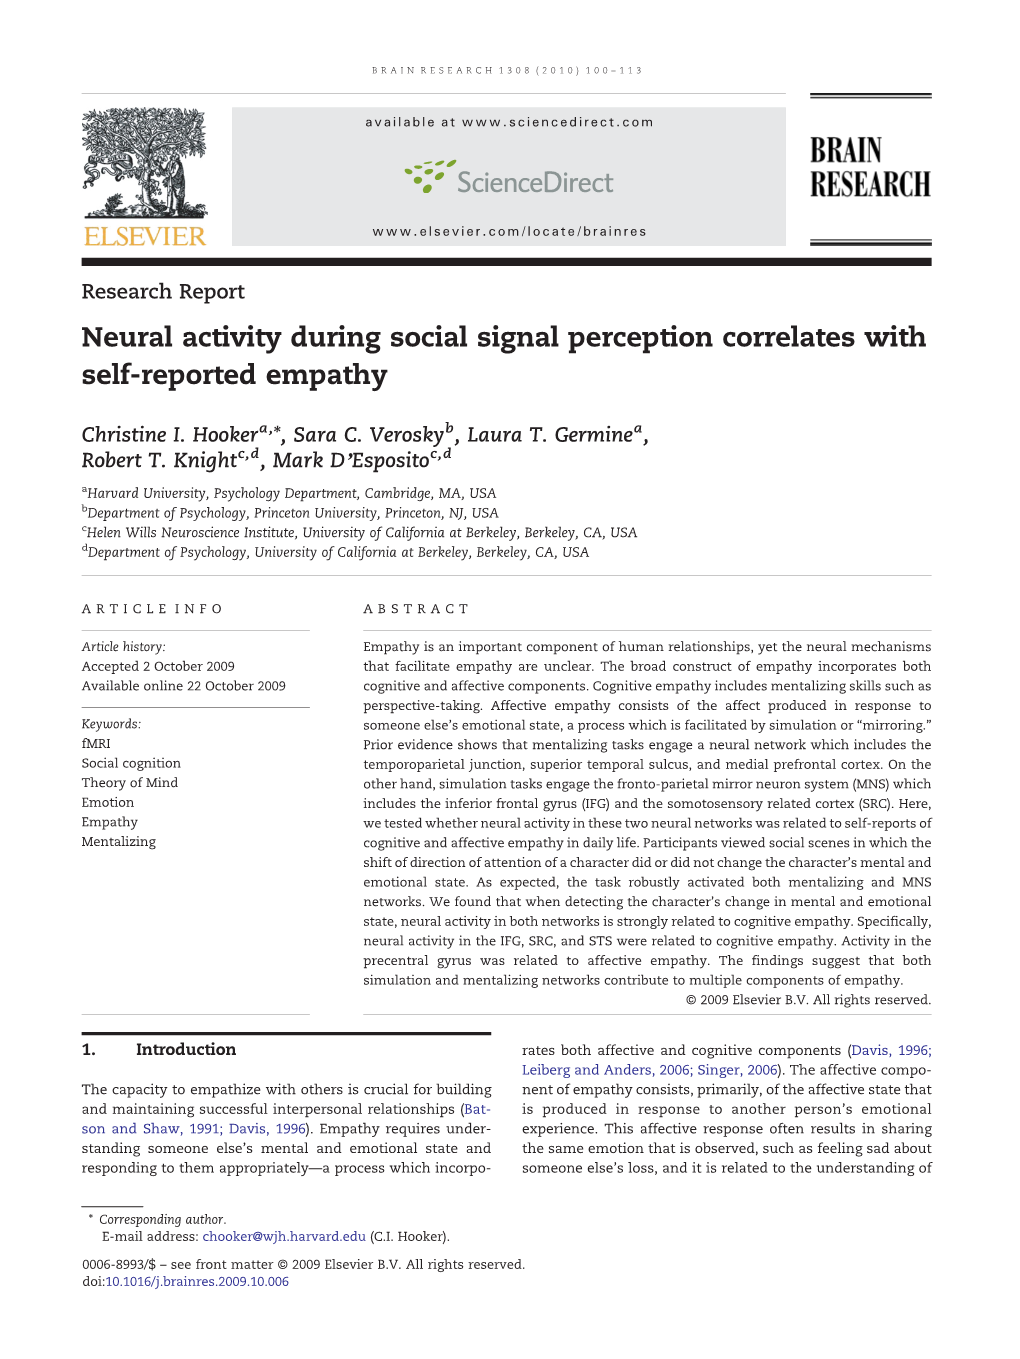 Neural Activity During Social Signal Perception Correlates with Self-Reported Empathy